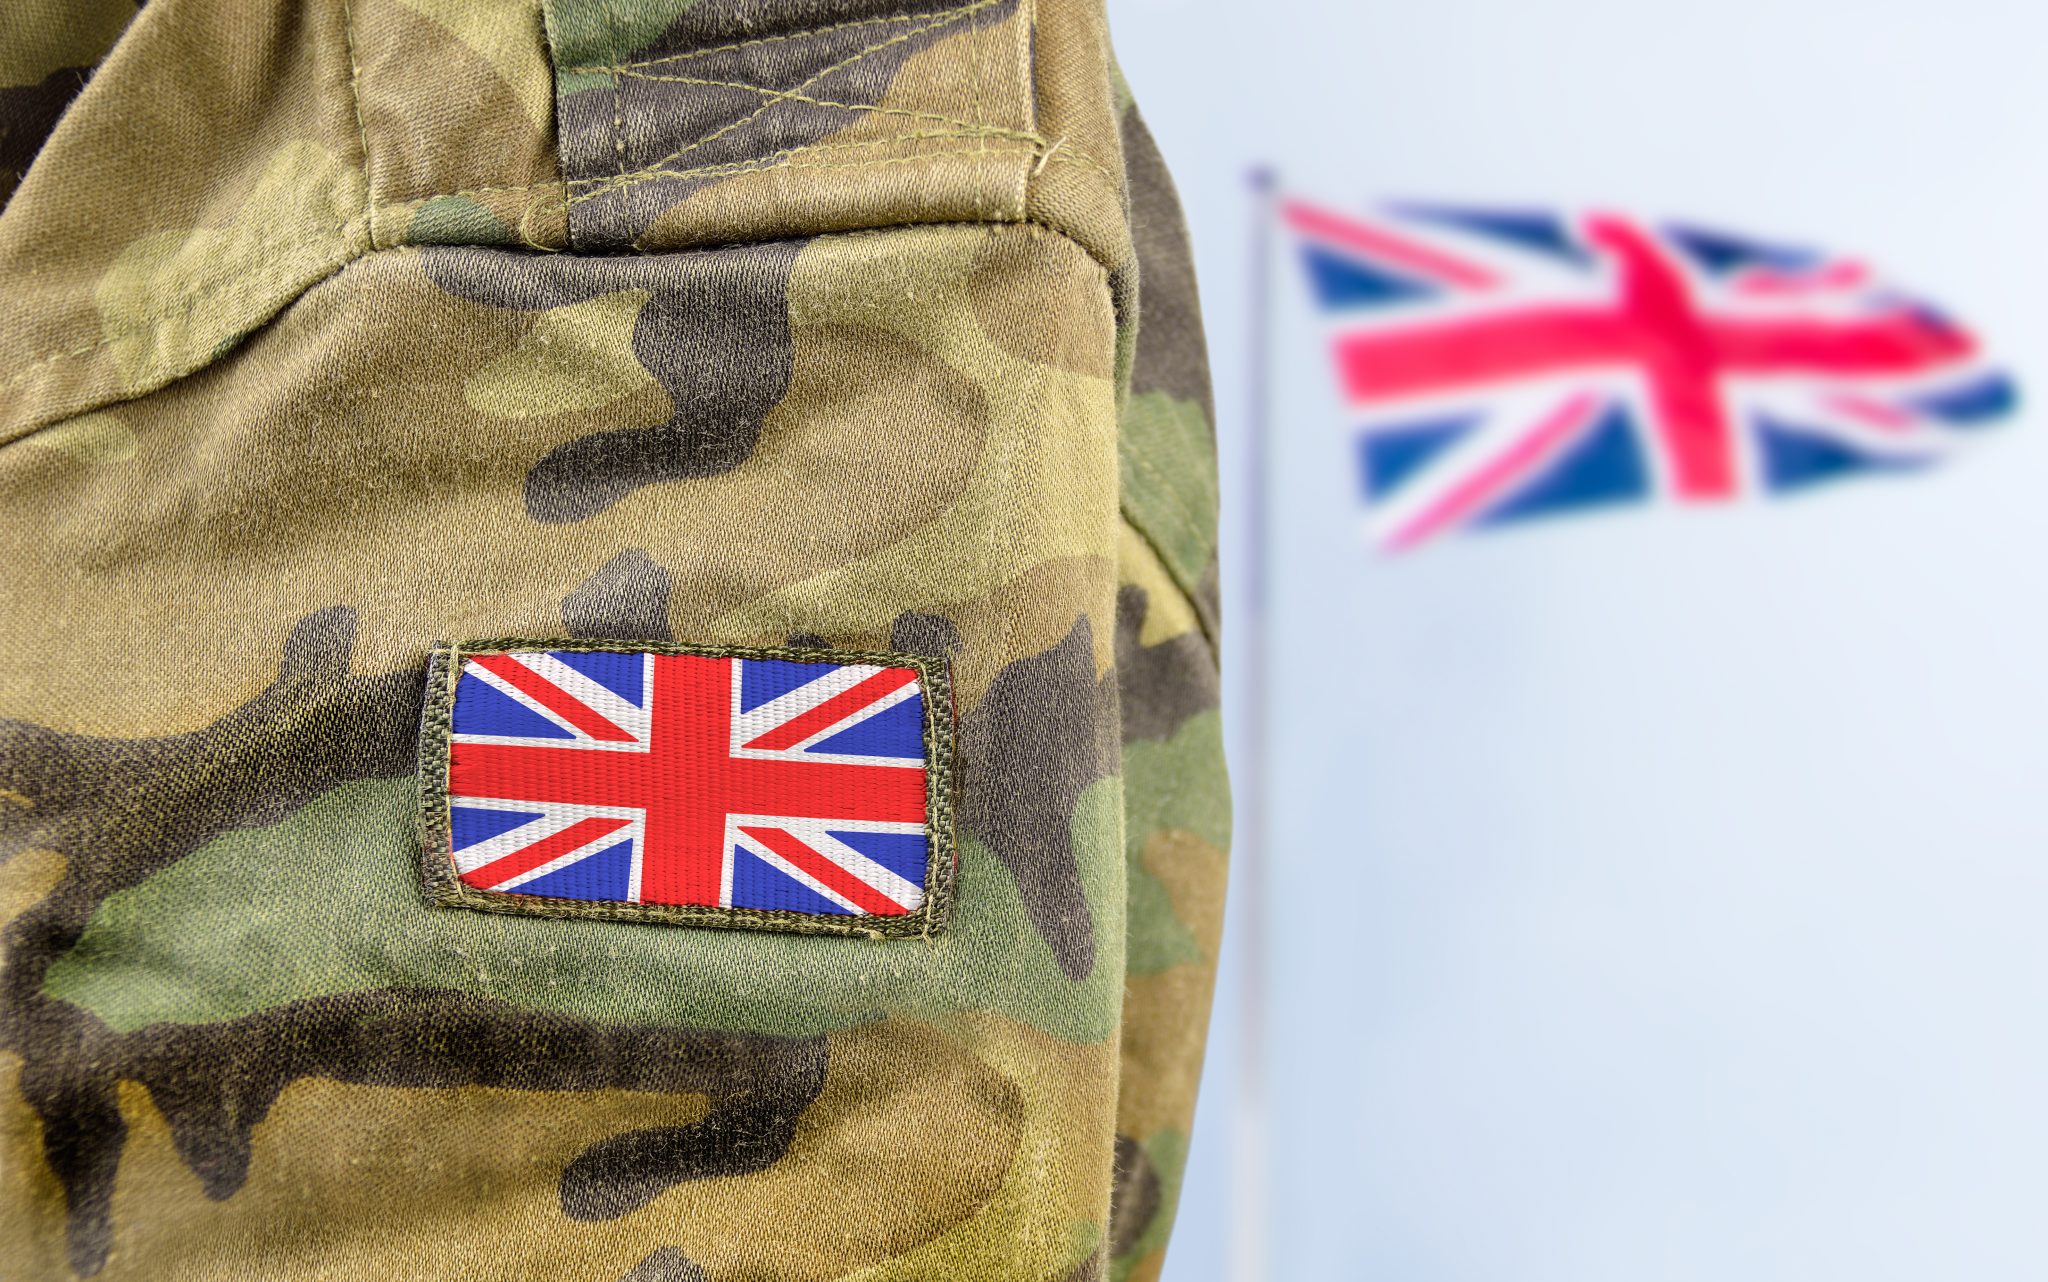 Miltary person standing in front of Union Jack flag